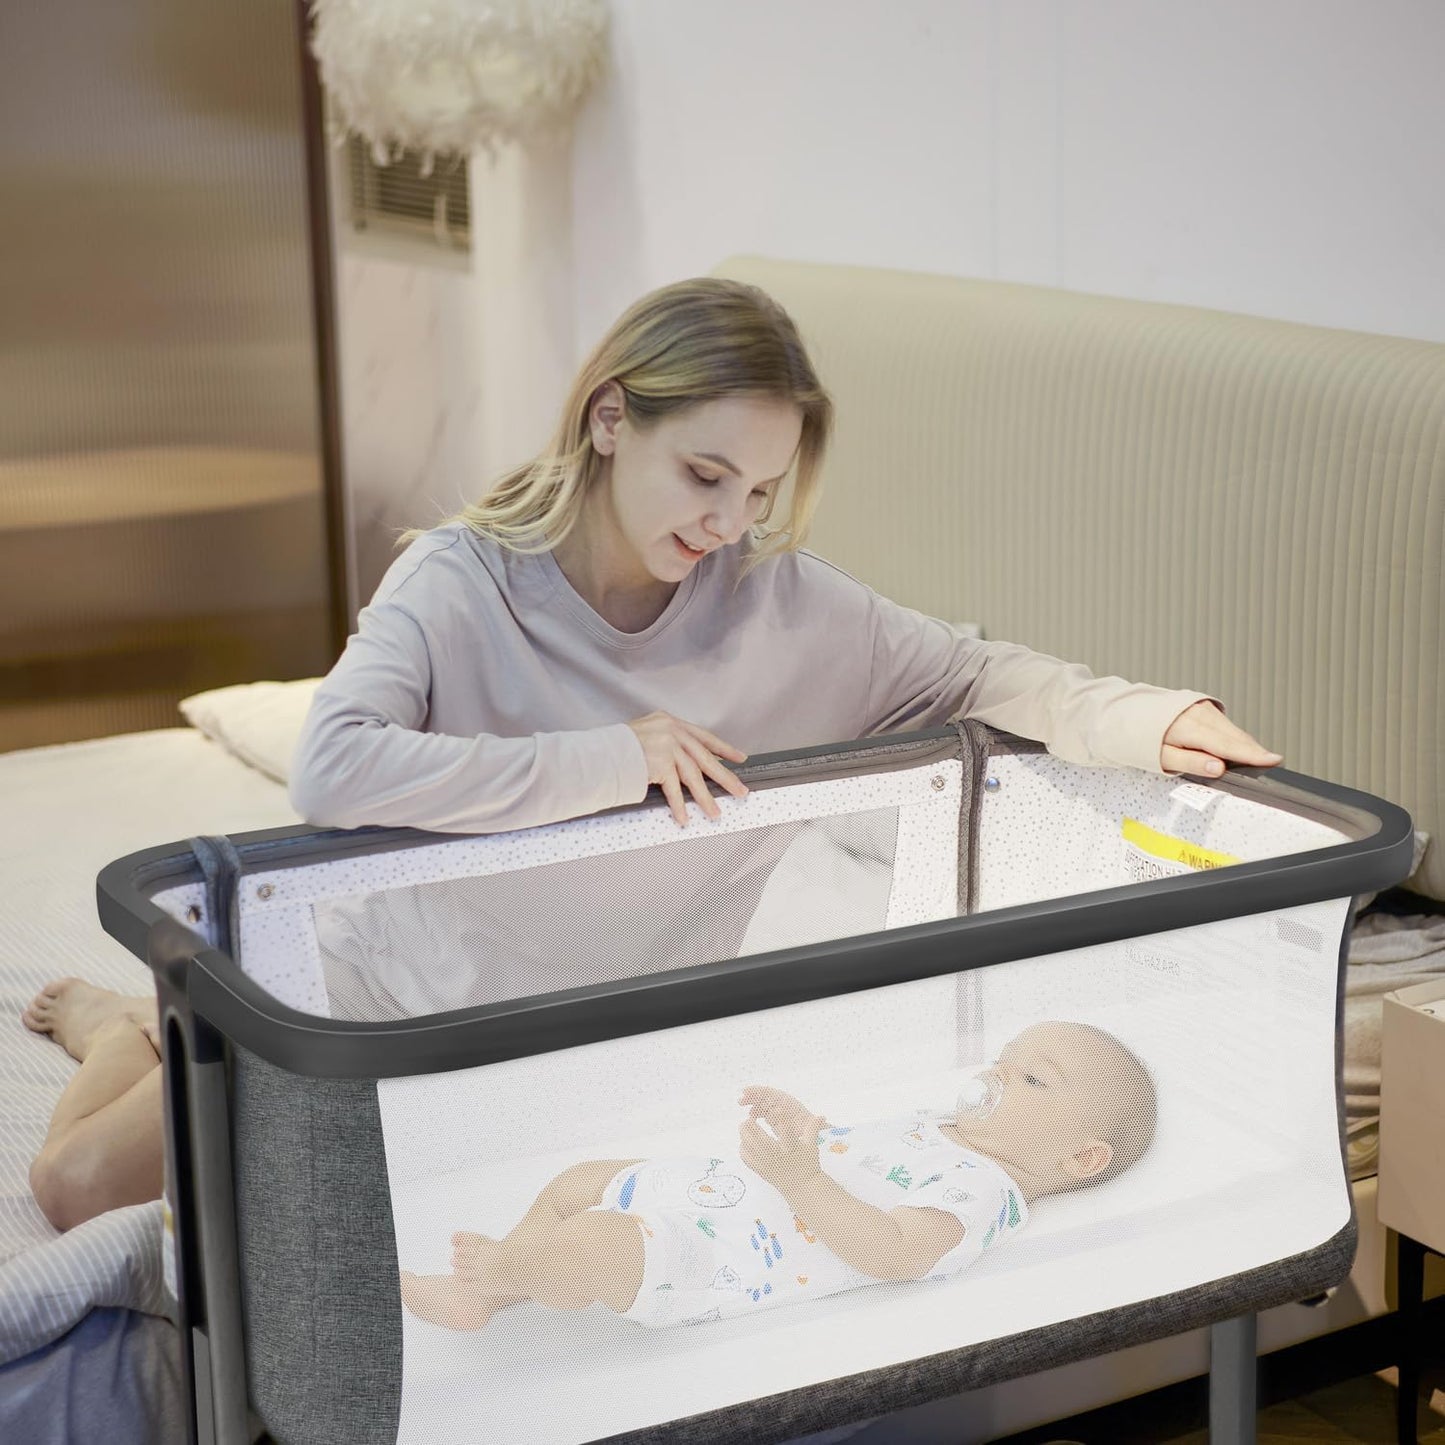 AMKE 3 in 1 Baby Bassinets,All Mesh Bedside Sleeper for Baby,Easy to Assemble Bassinet for Newborn/Infant,Baby Cradle with Storage Basket,Adjustable Bedside Crib,Safe Portable Baby Bed